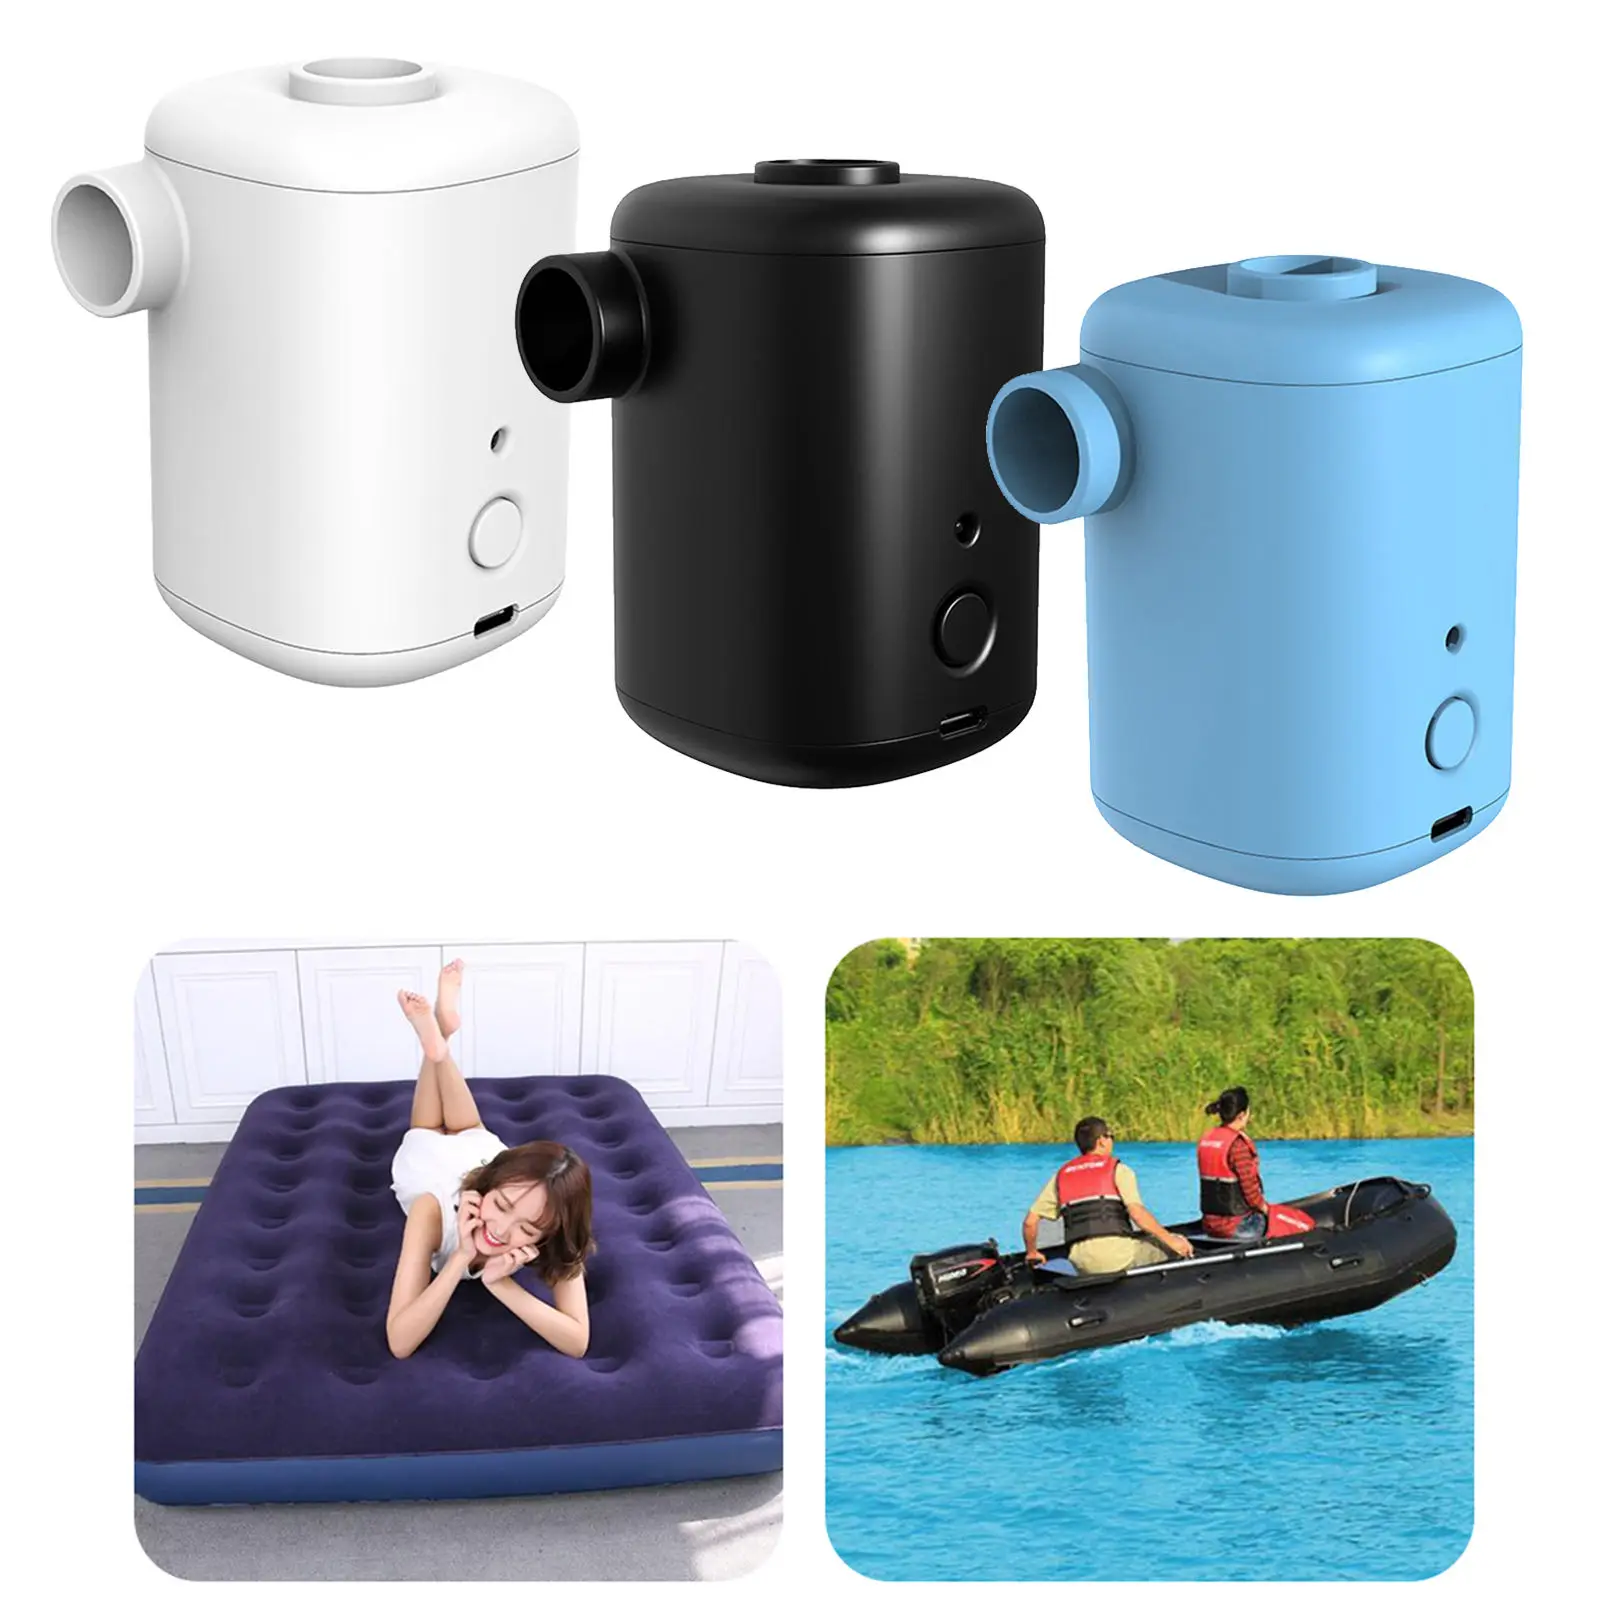 USB Electric Air Pump Inflator Swimming Pools Bathtube Balloon Air Beds Floats Tube Inflator Air Filling Deflatable Inflatable